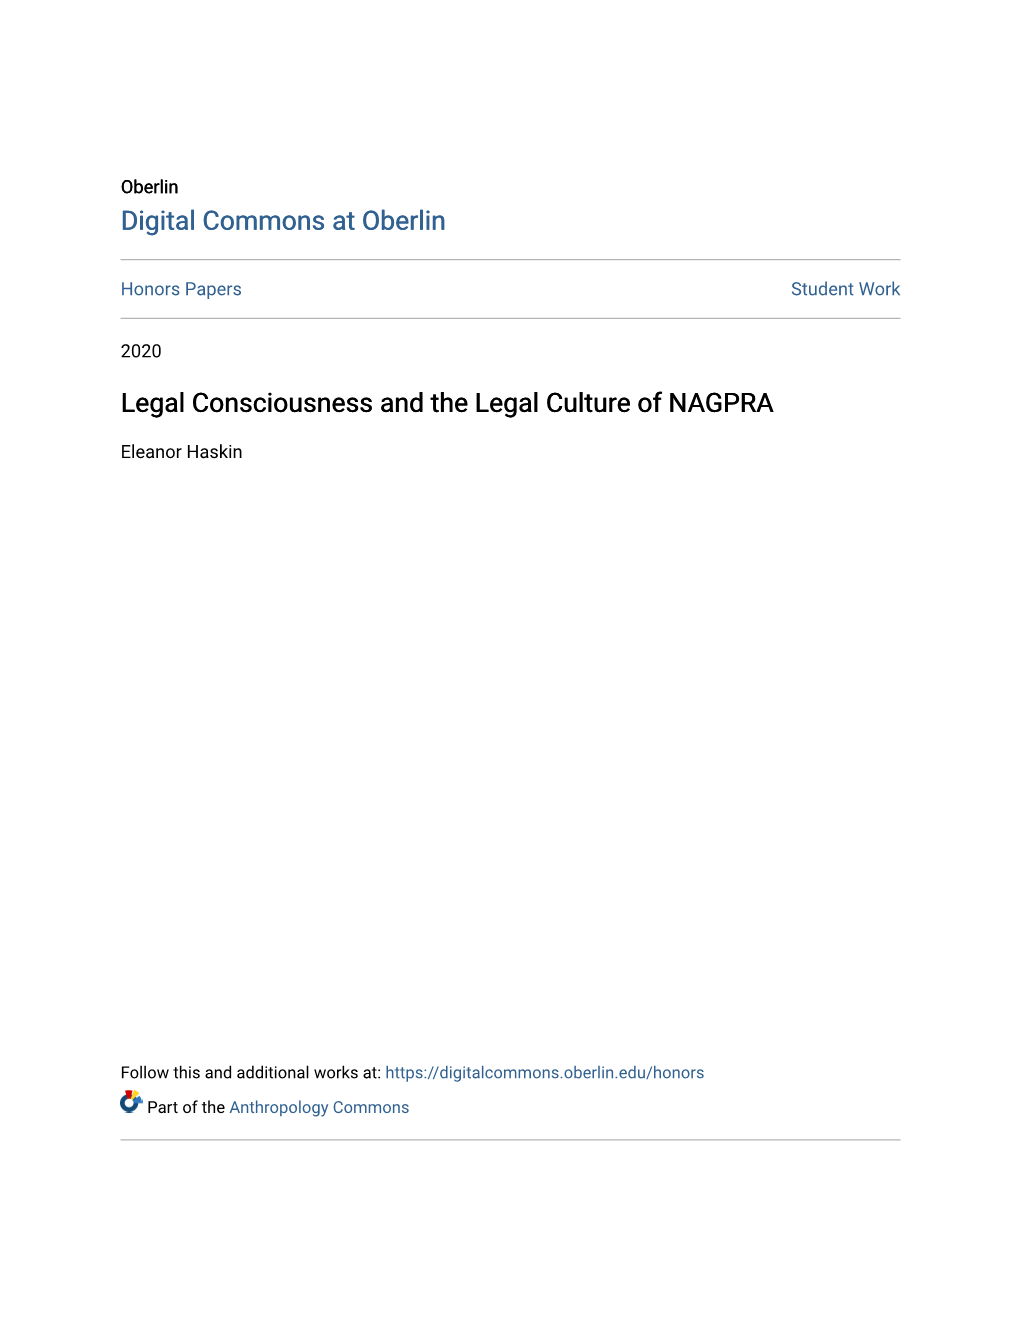 Legal Consciousness and the Legal Culture of NAGPRA